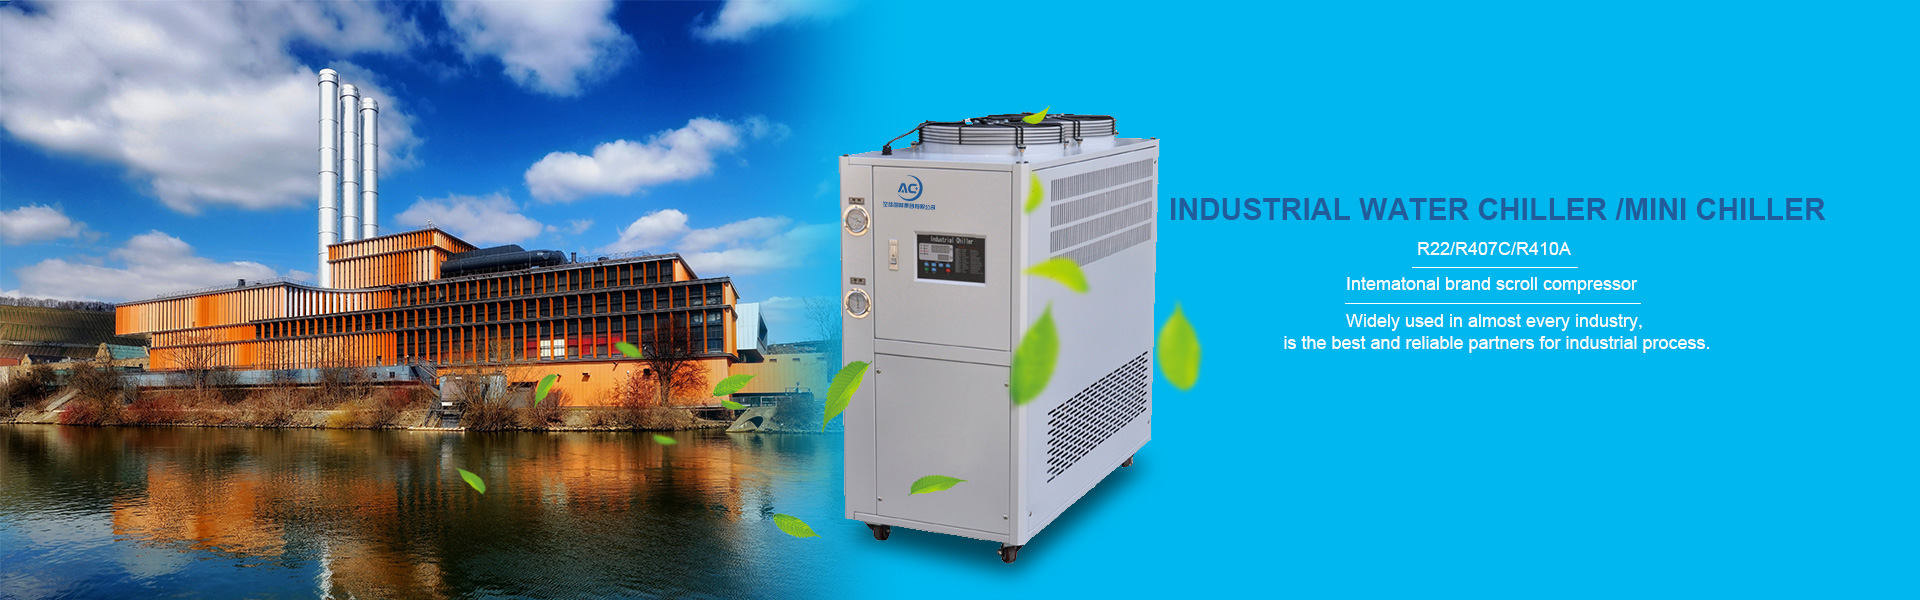 AC+ a professional water chiller central air condition manufacturer